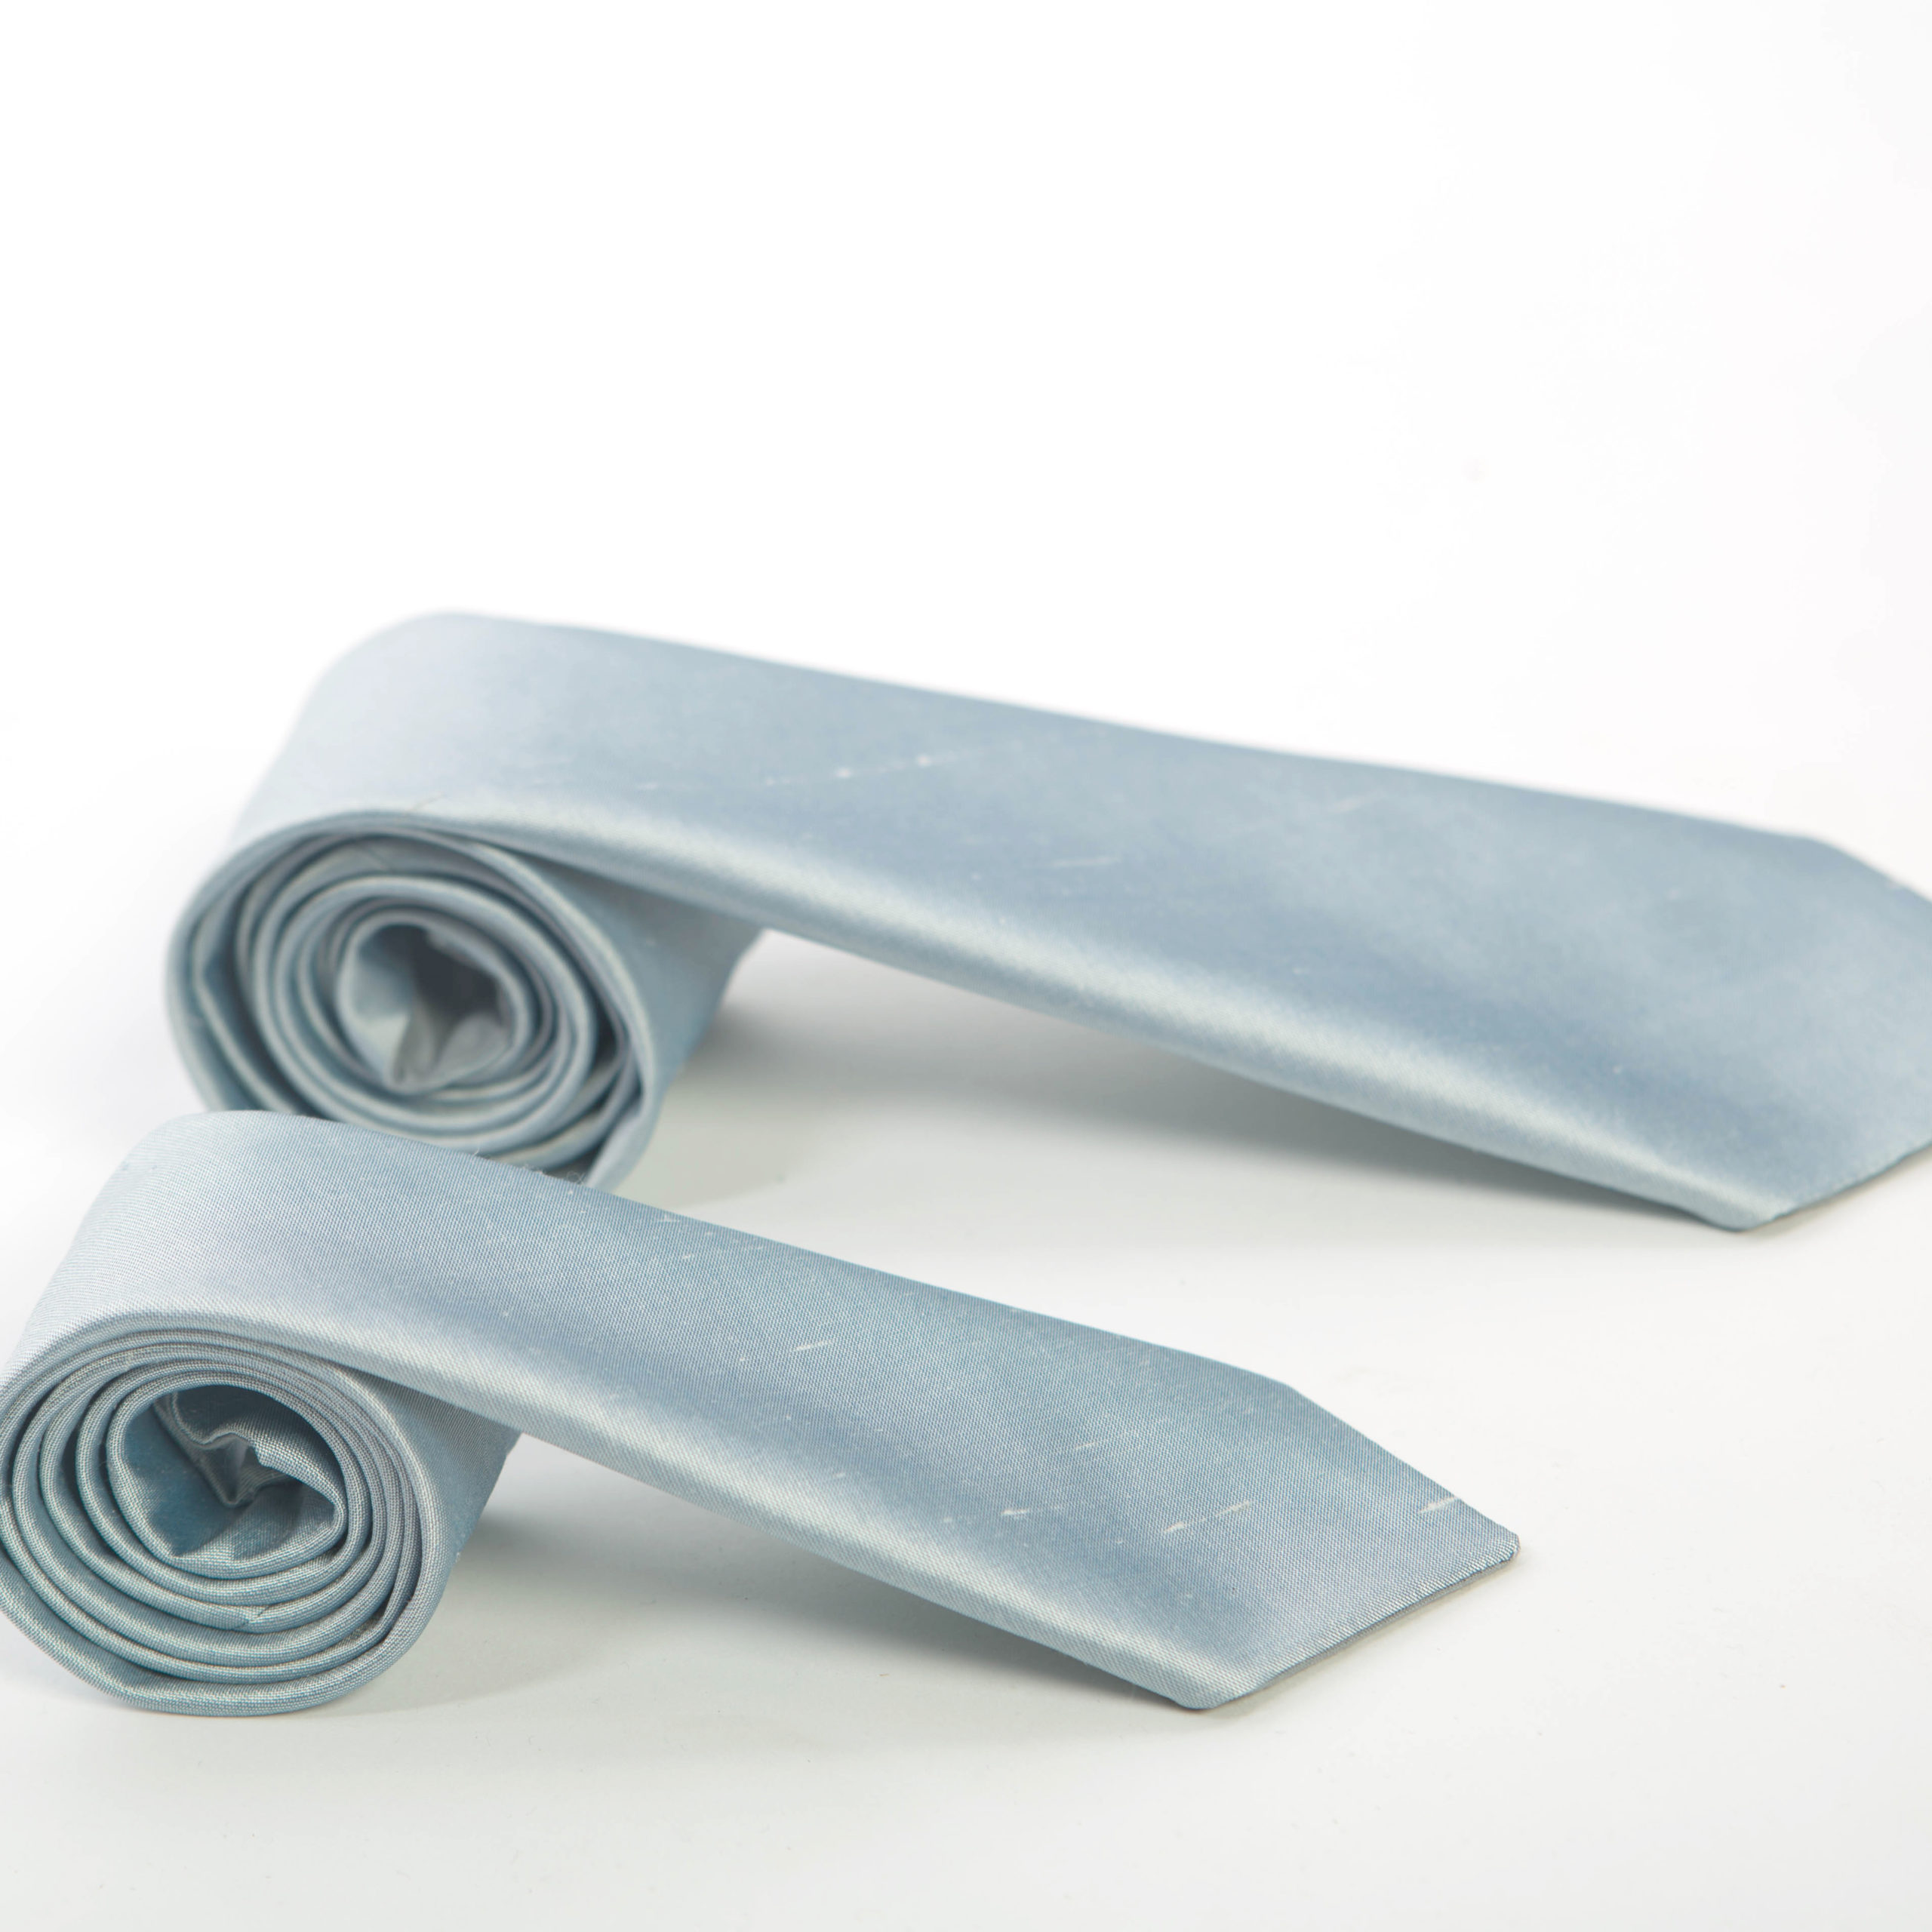 Men's and boy's matching pale blue silk ties - The Little Wedding Company